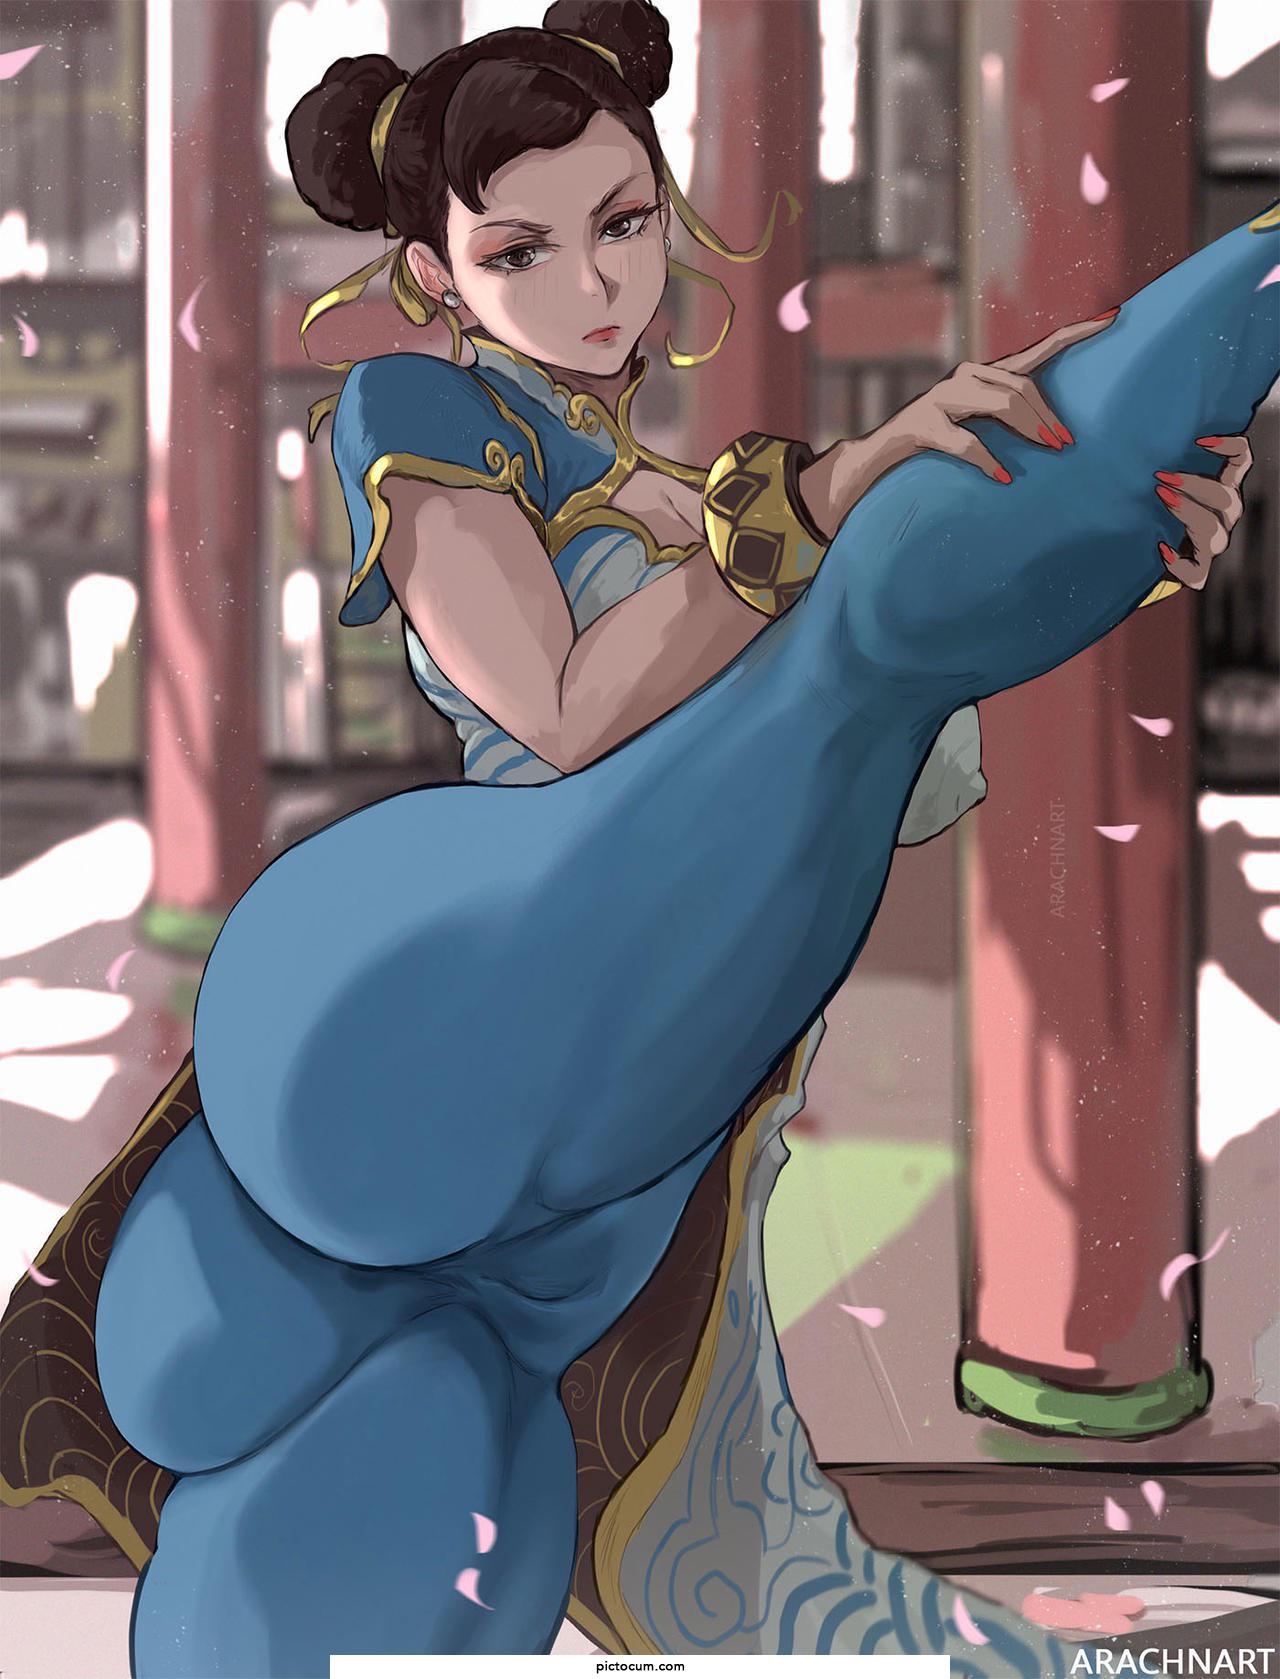 Chun-Li’s flexibility is enticing, and she knows it